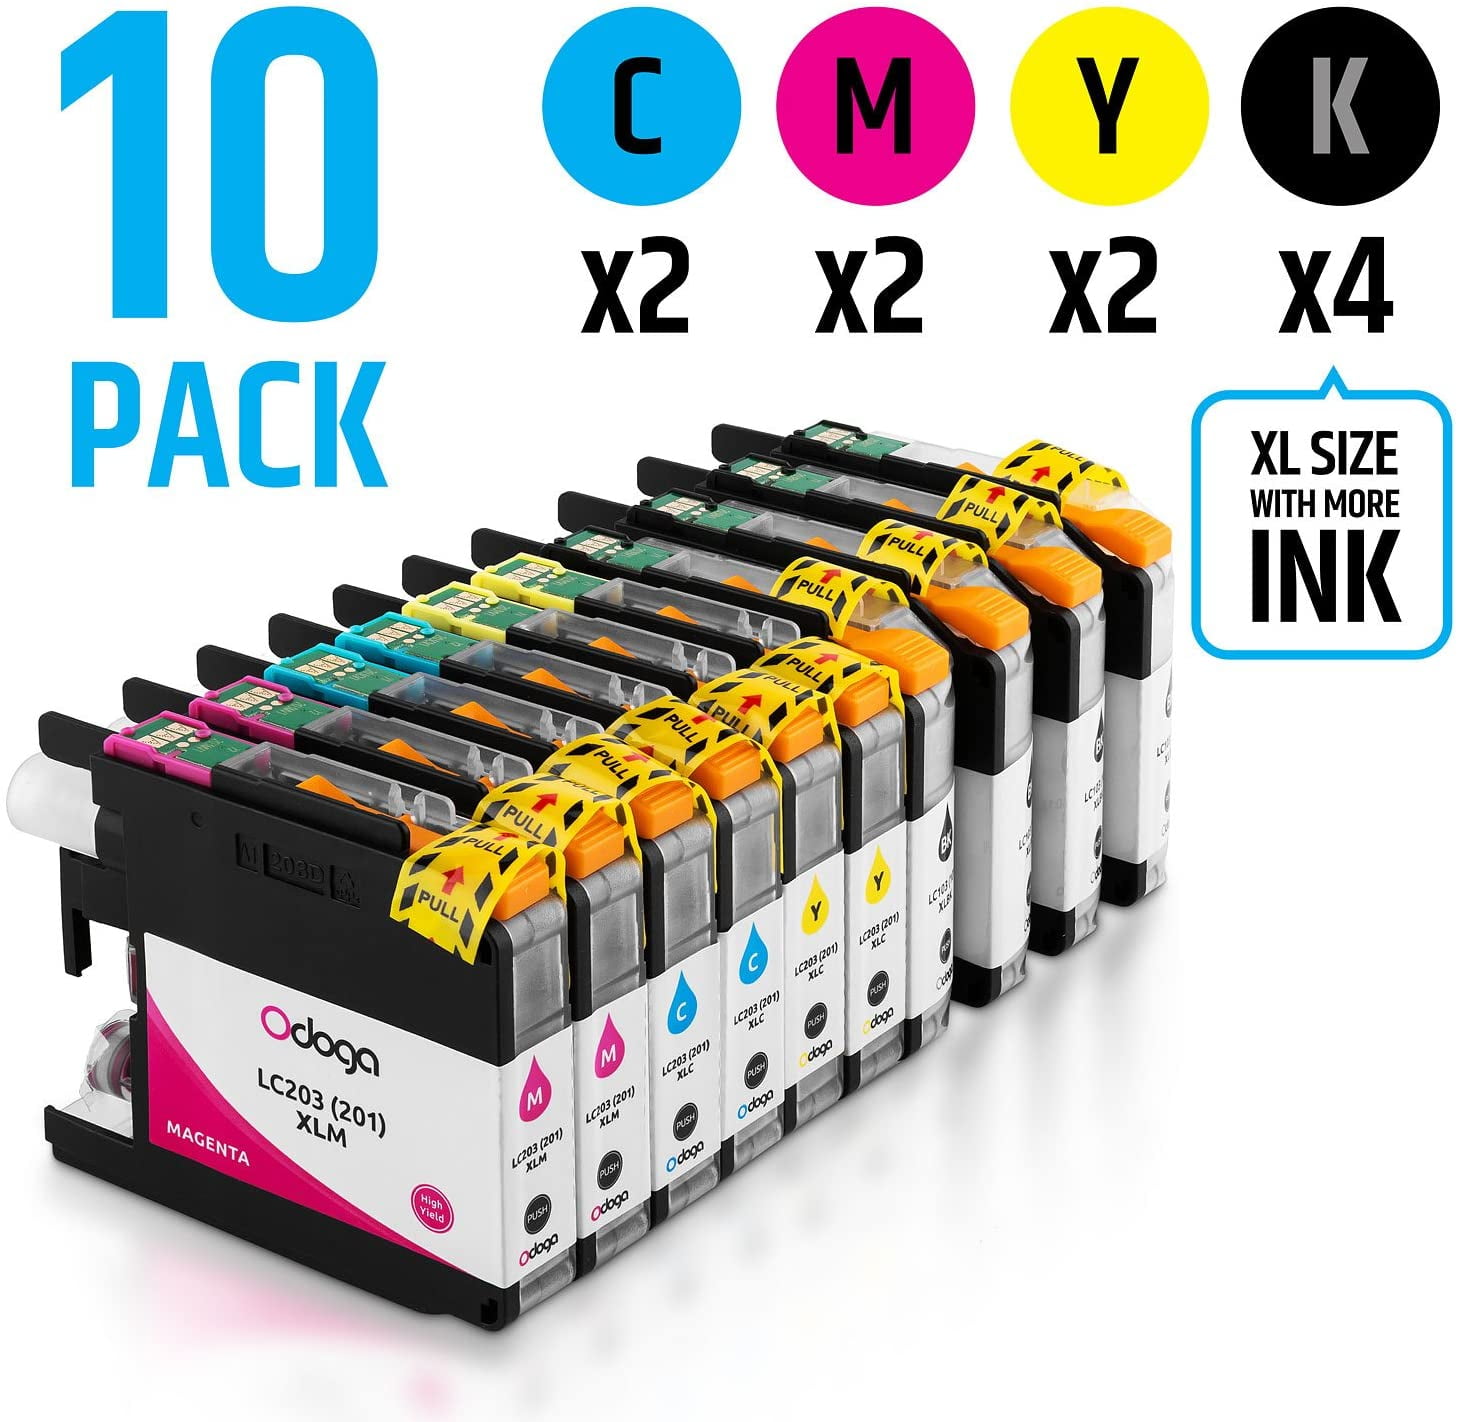 Ink Cartridge for Brother MFC-J5520DW Brother MFC-J4320DW Brother LC203 10 Pack 